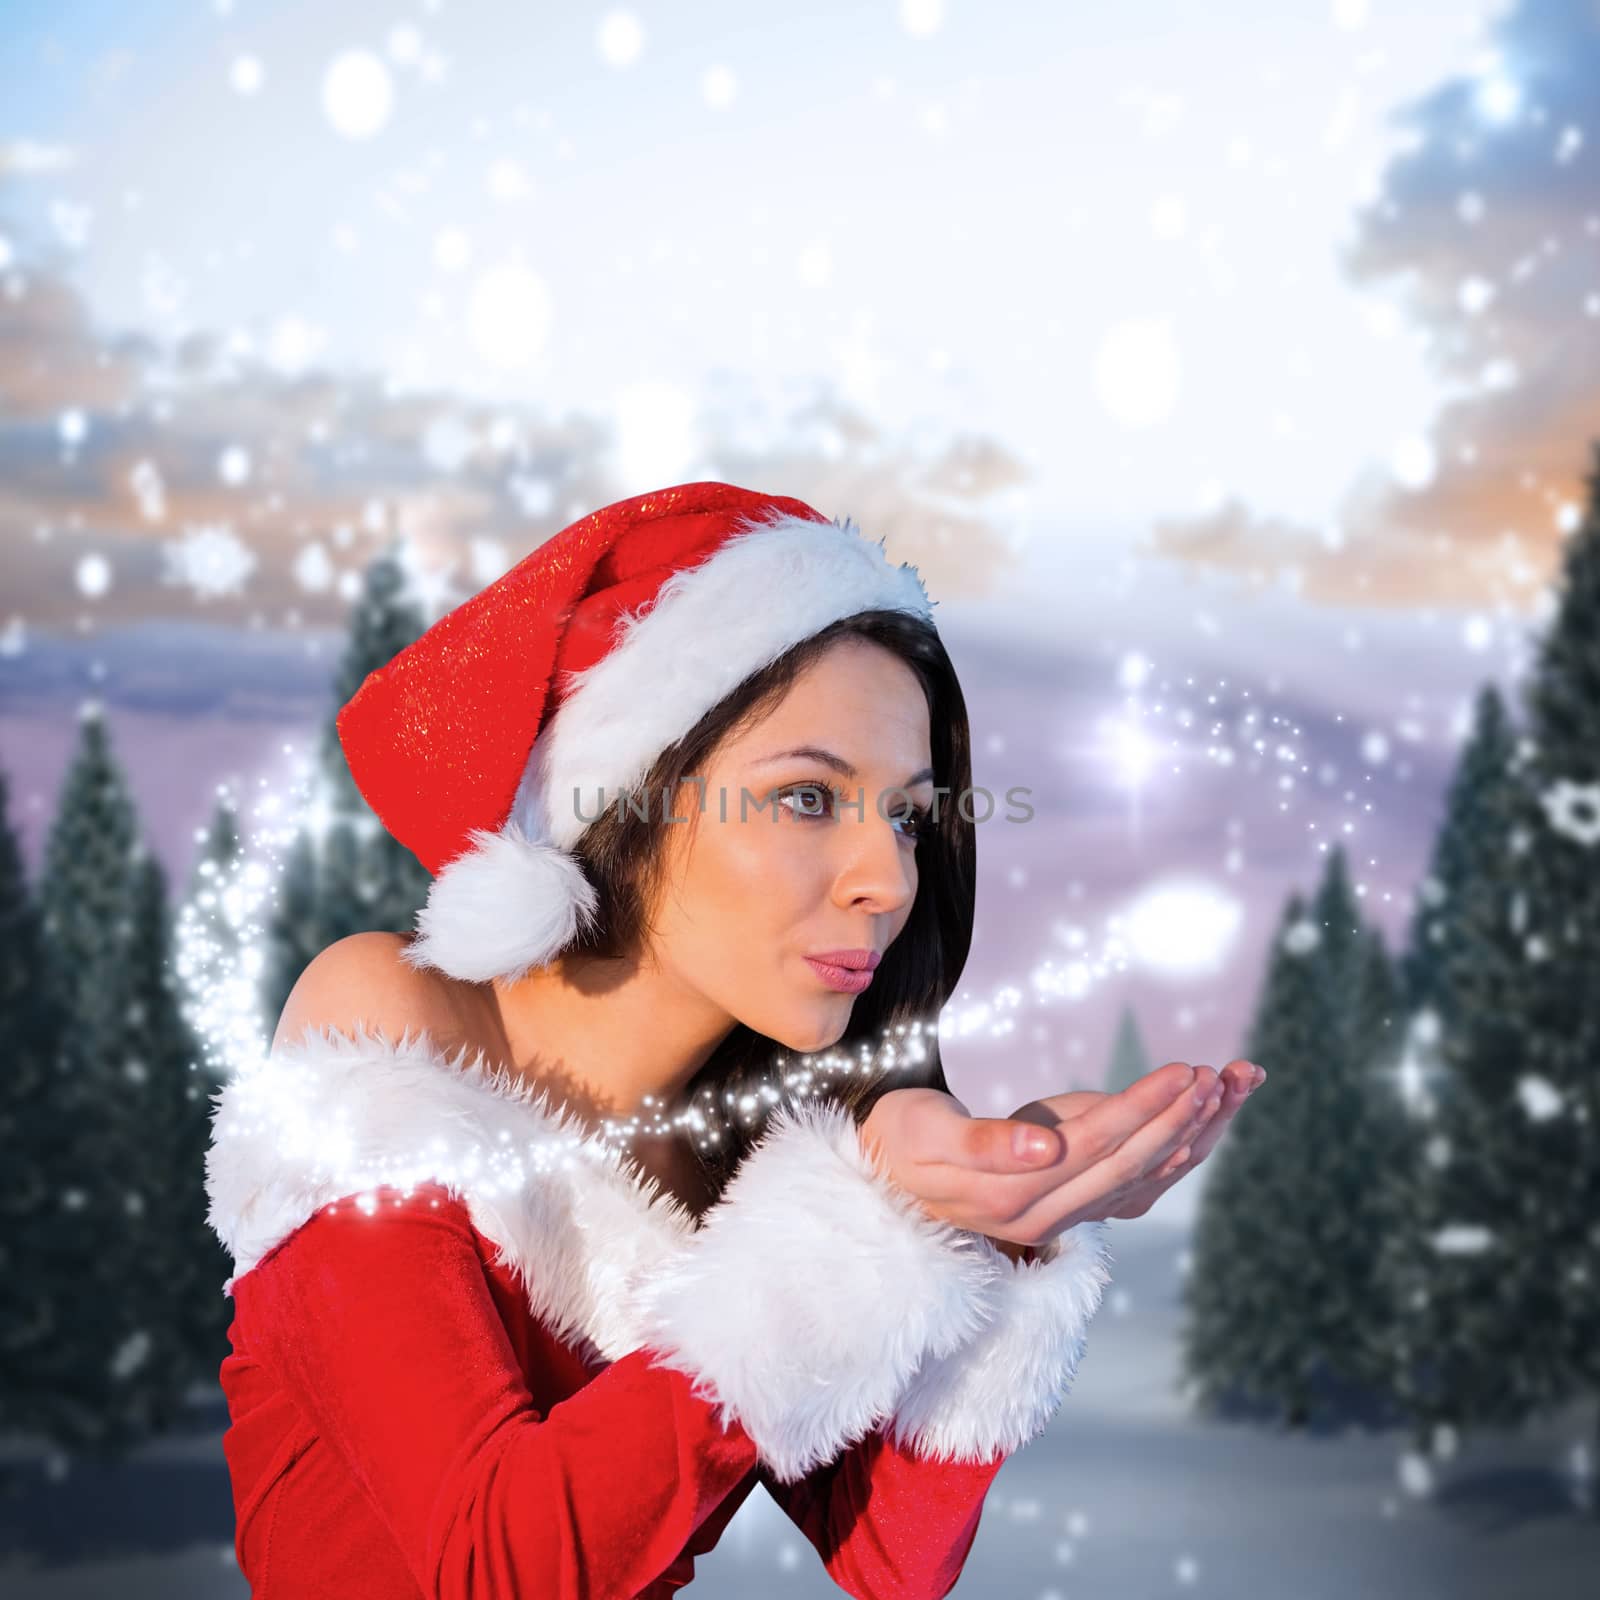 Pretty girl in santa outfit blowing against snowy landscape with fir trees